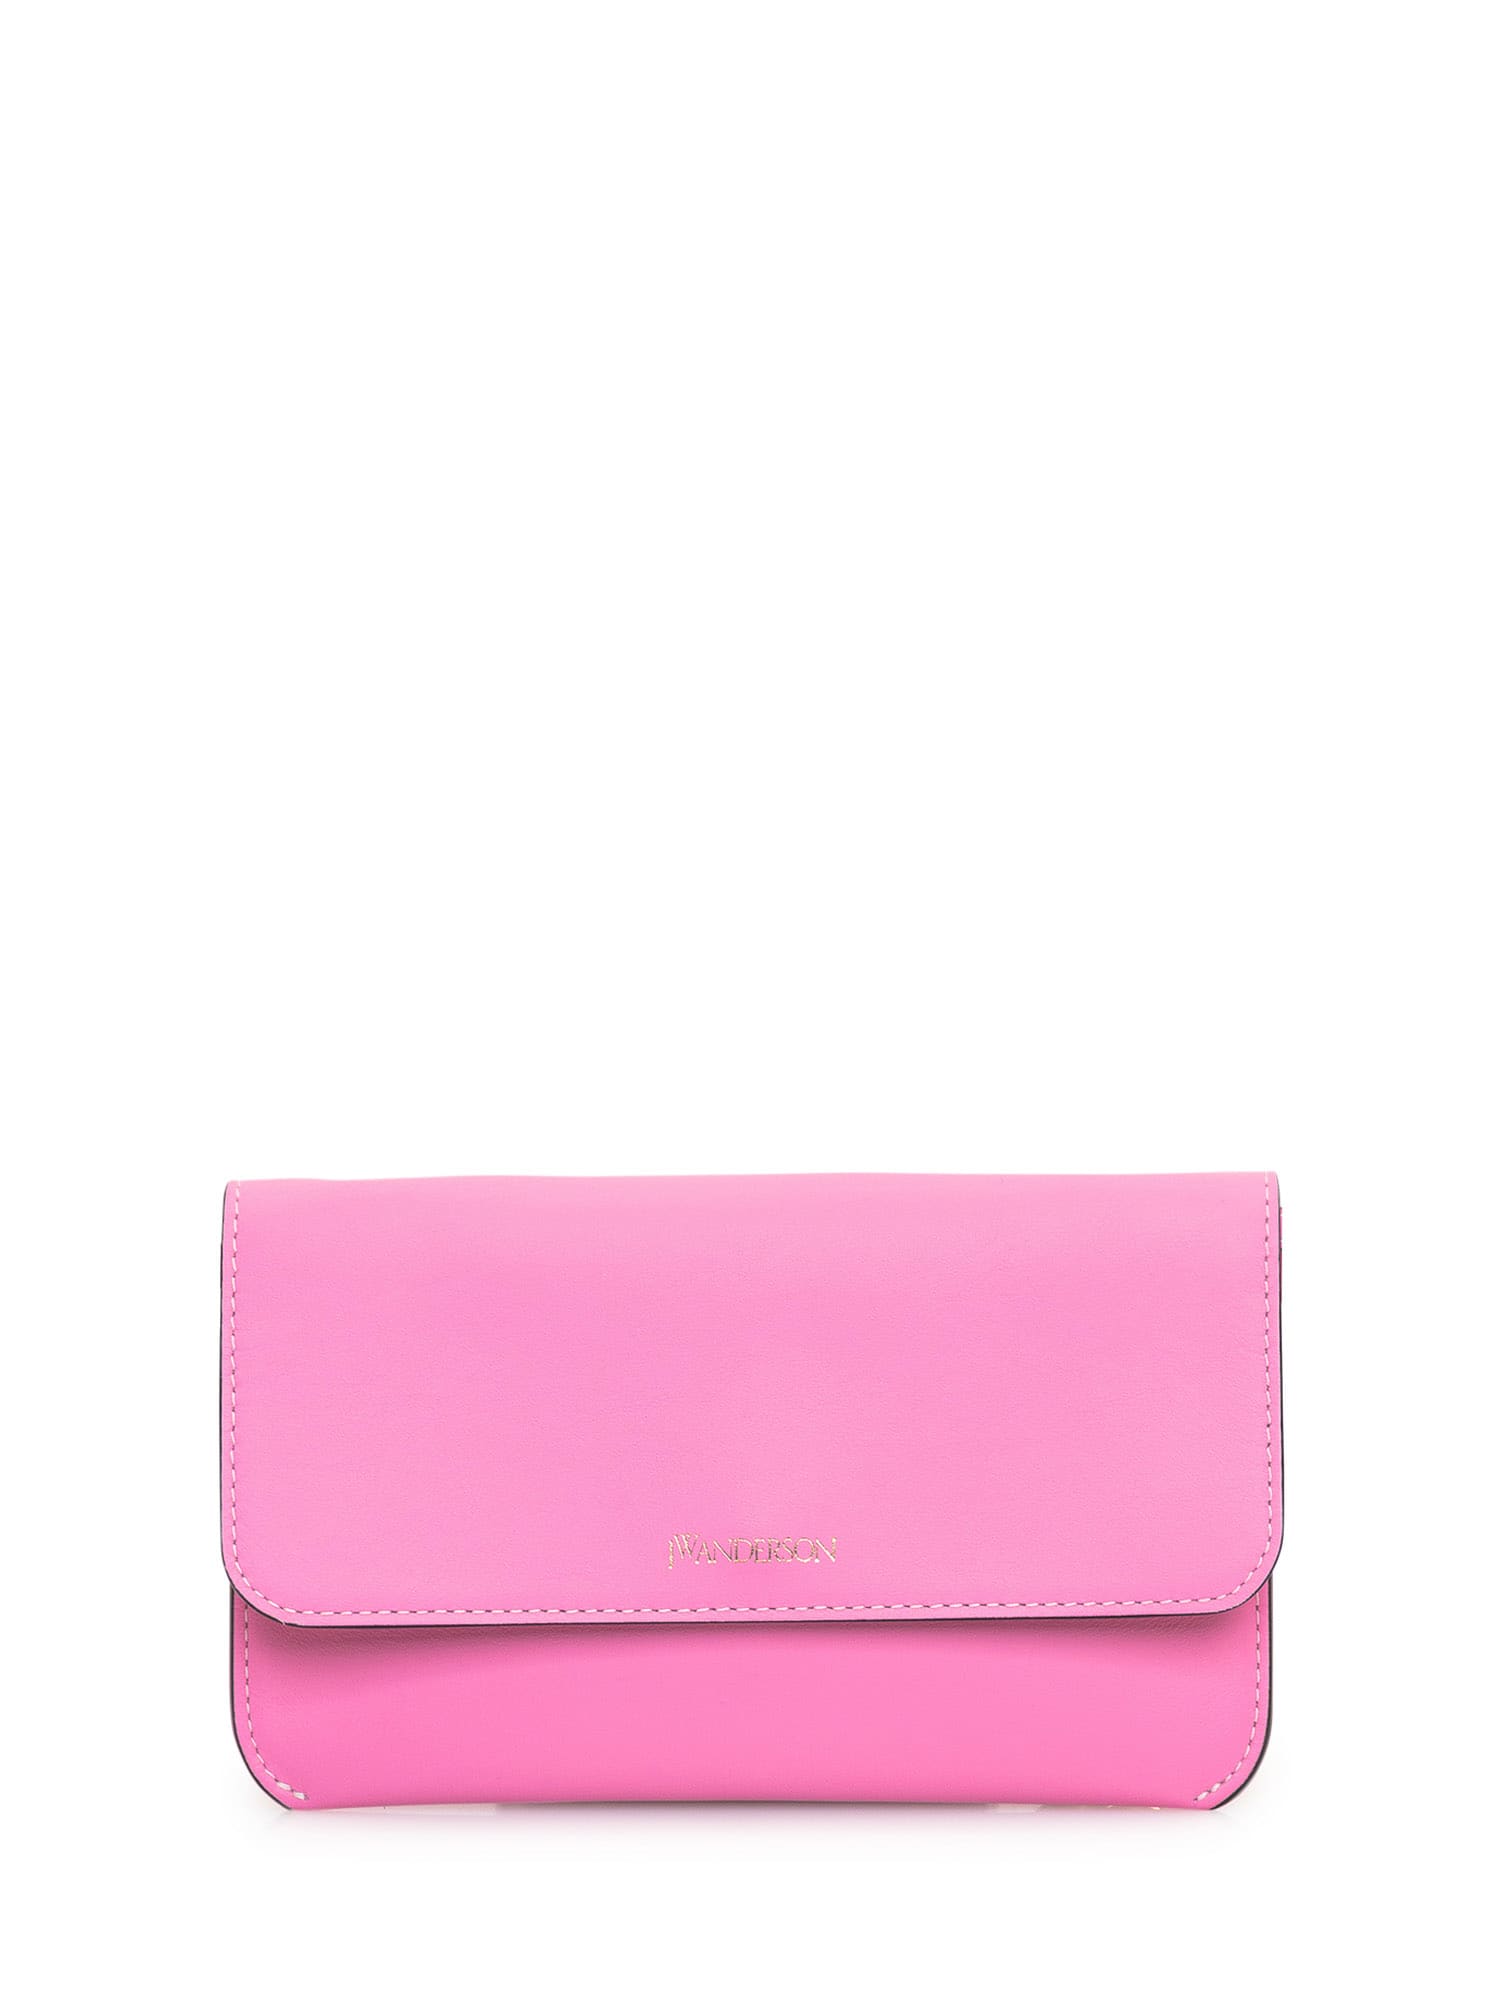 Jw Anderson J.w. Anderson Pink Leather Phone Bag